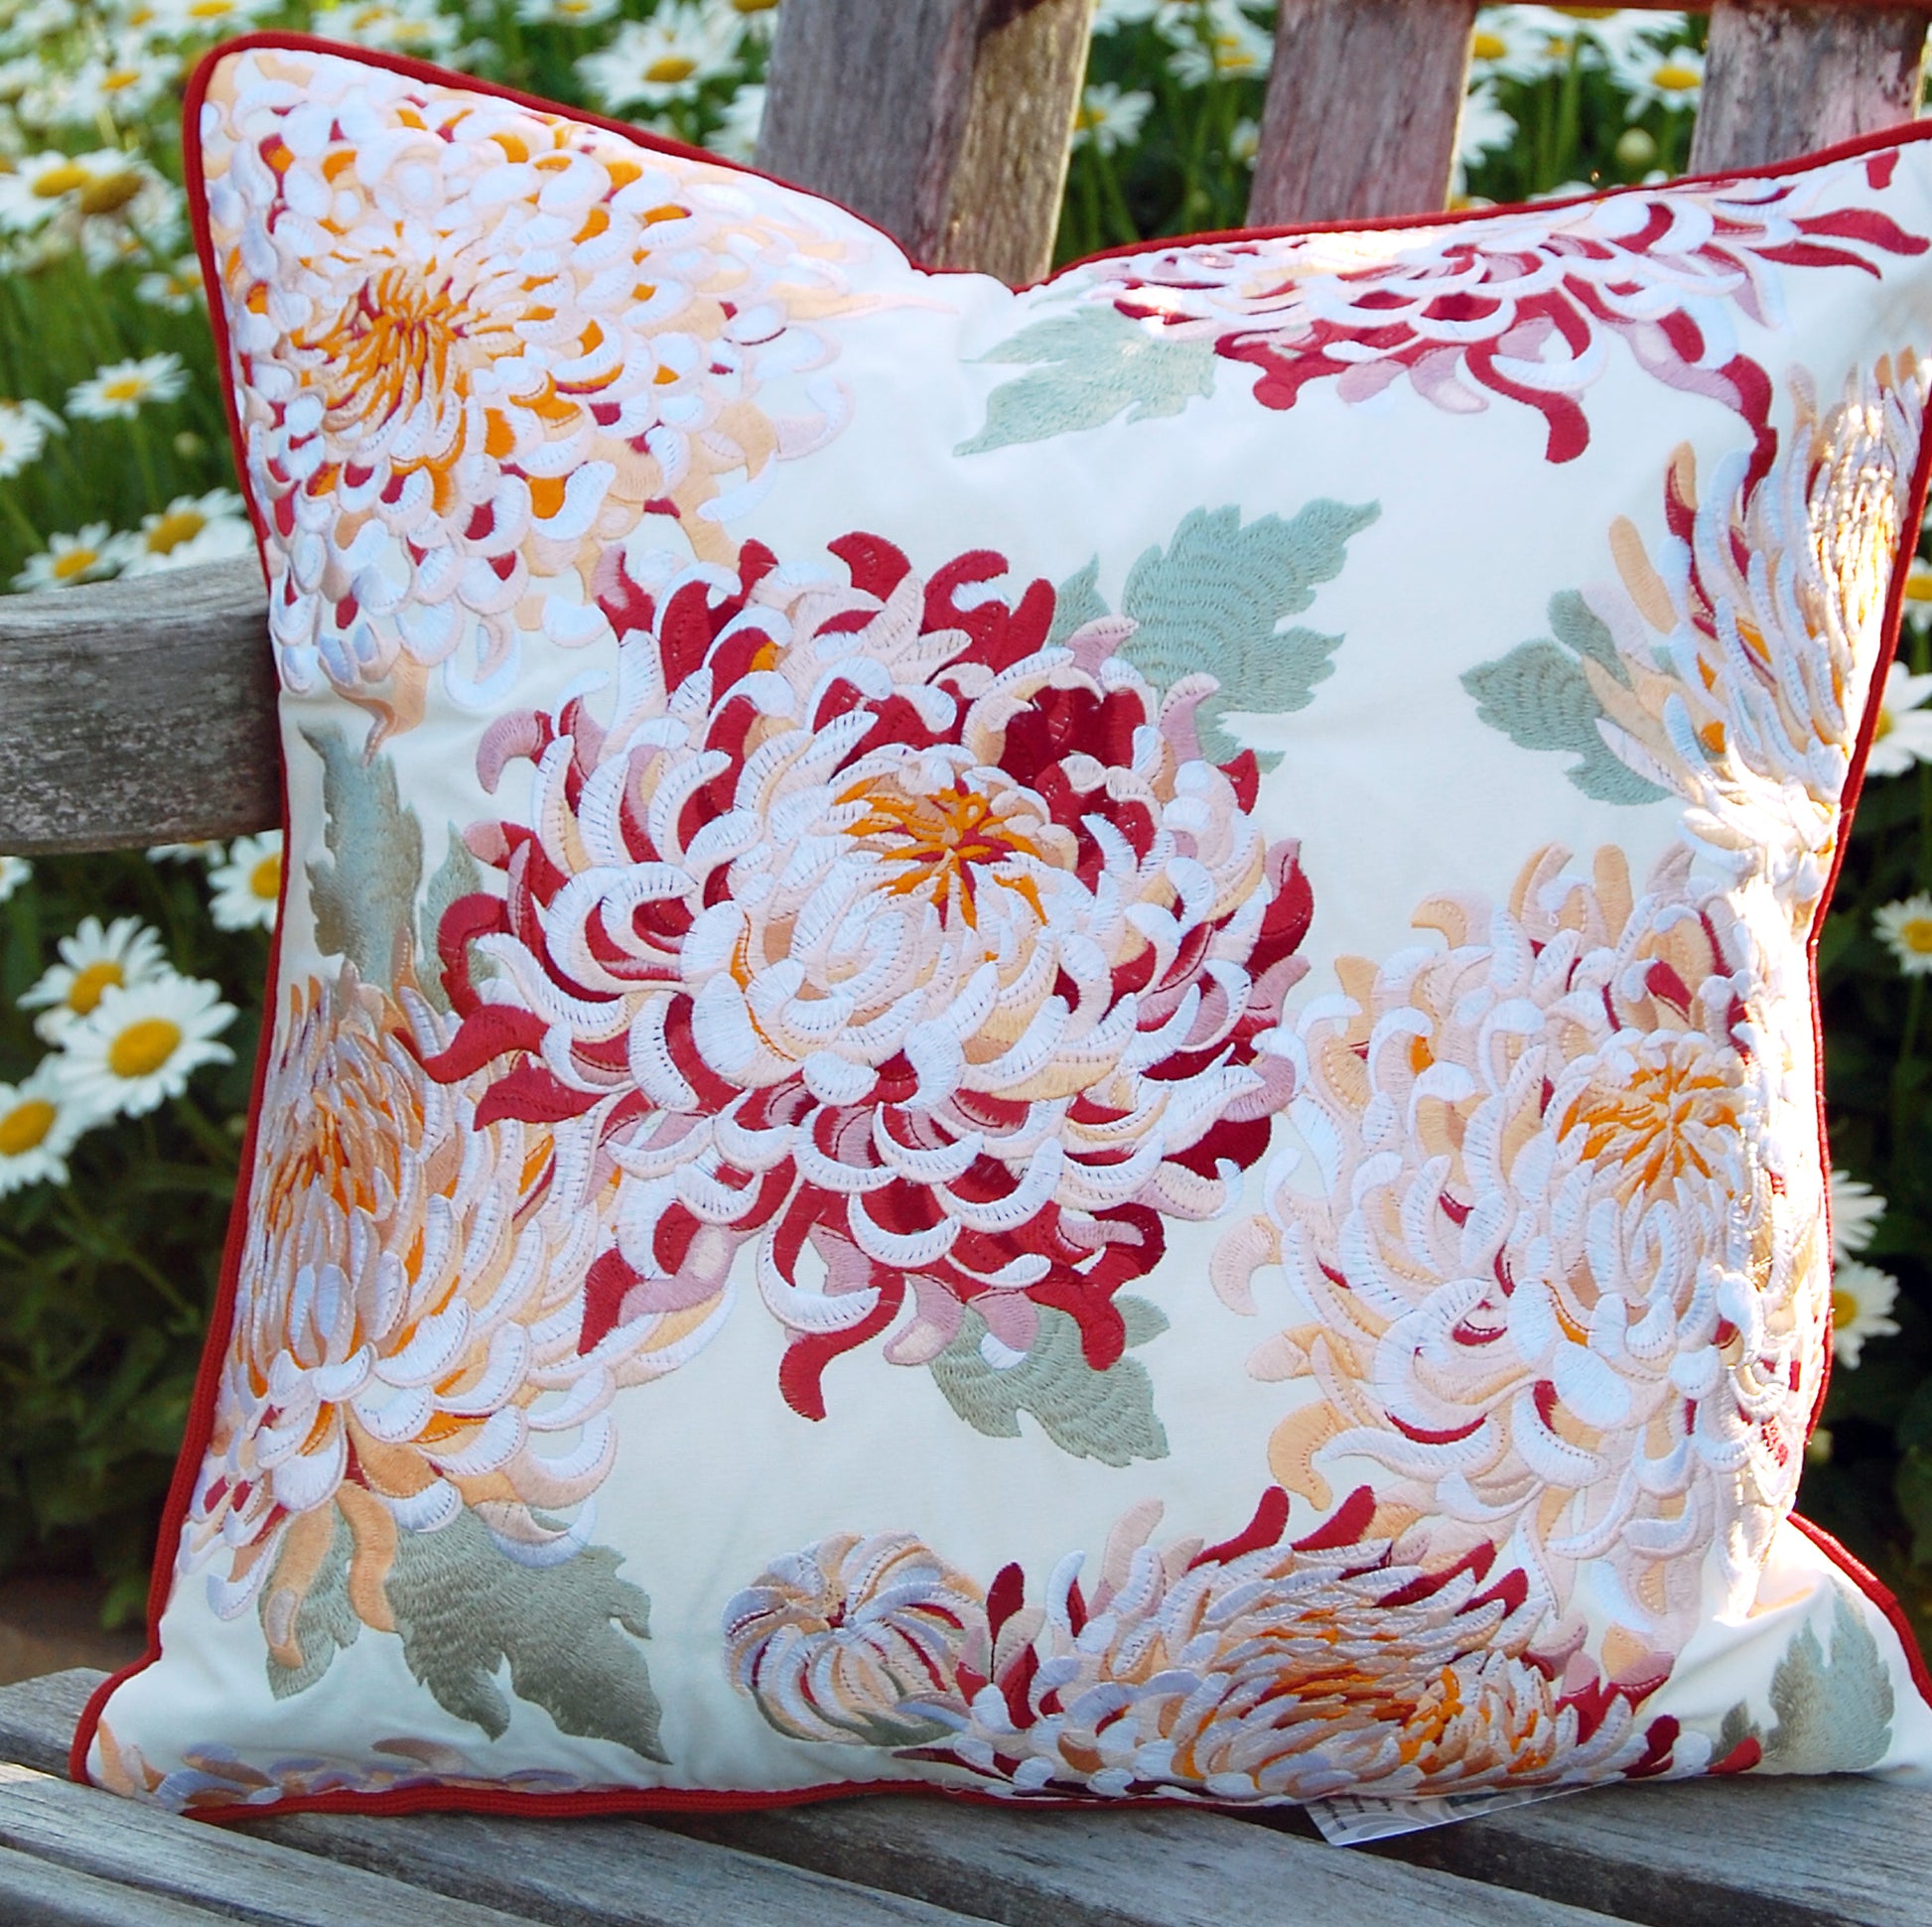 Chrysanthemum pillow styled in a garden on a wooden bench.